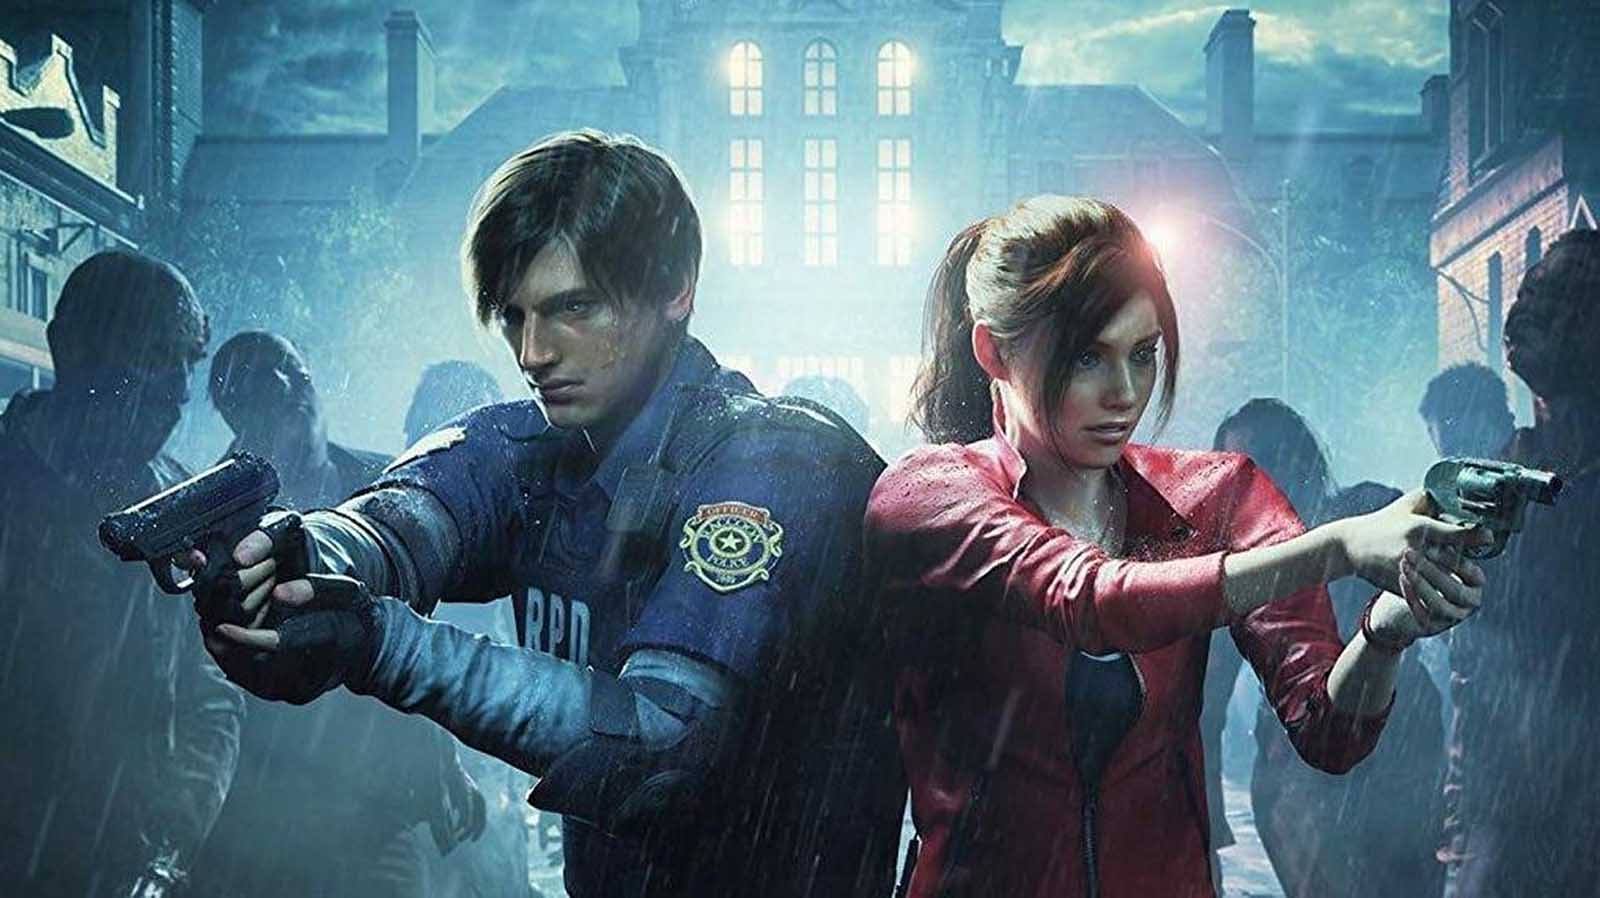 Welcome to Raccoon City Full Movie Online Free Streaming